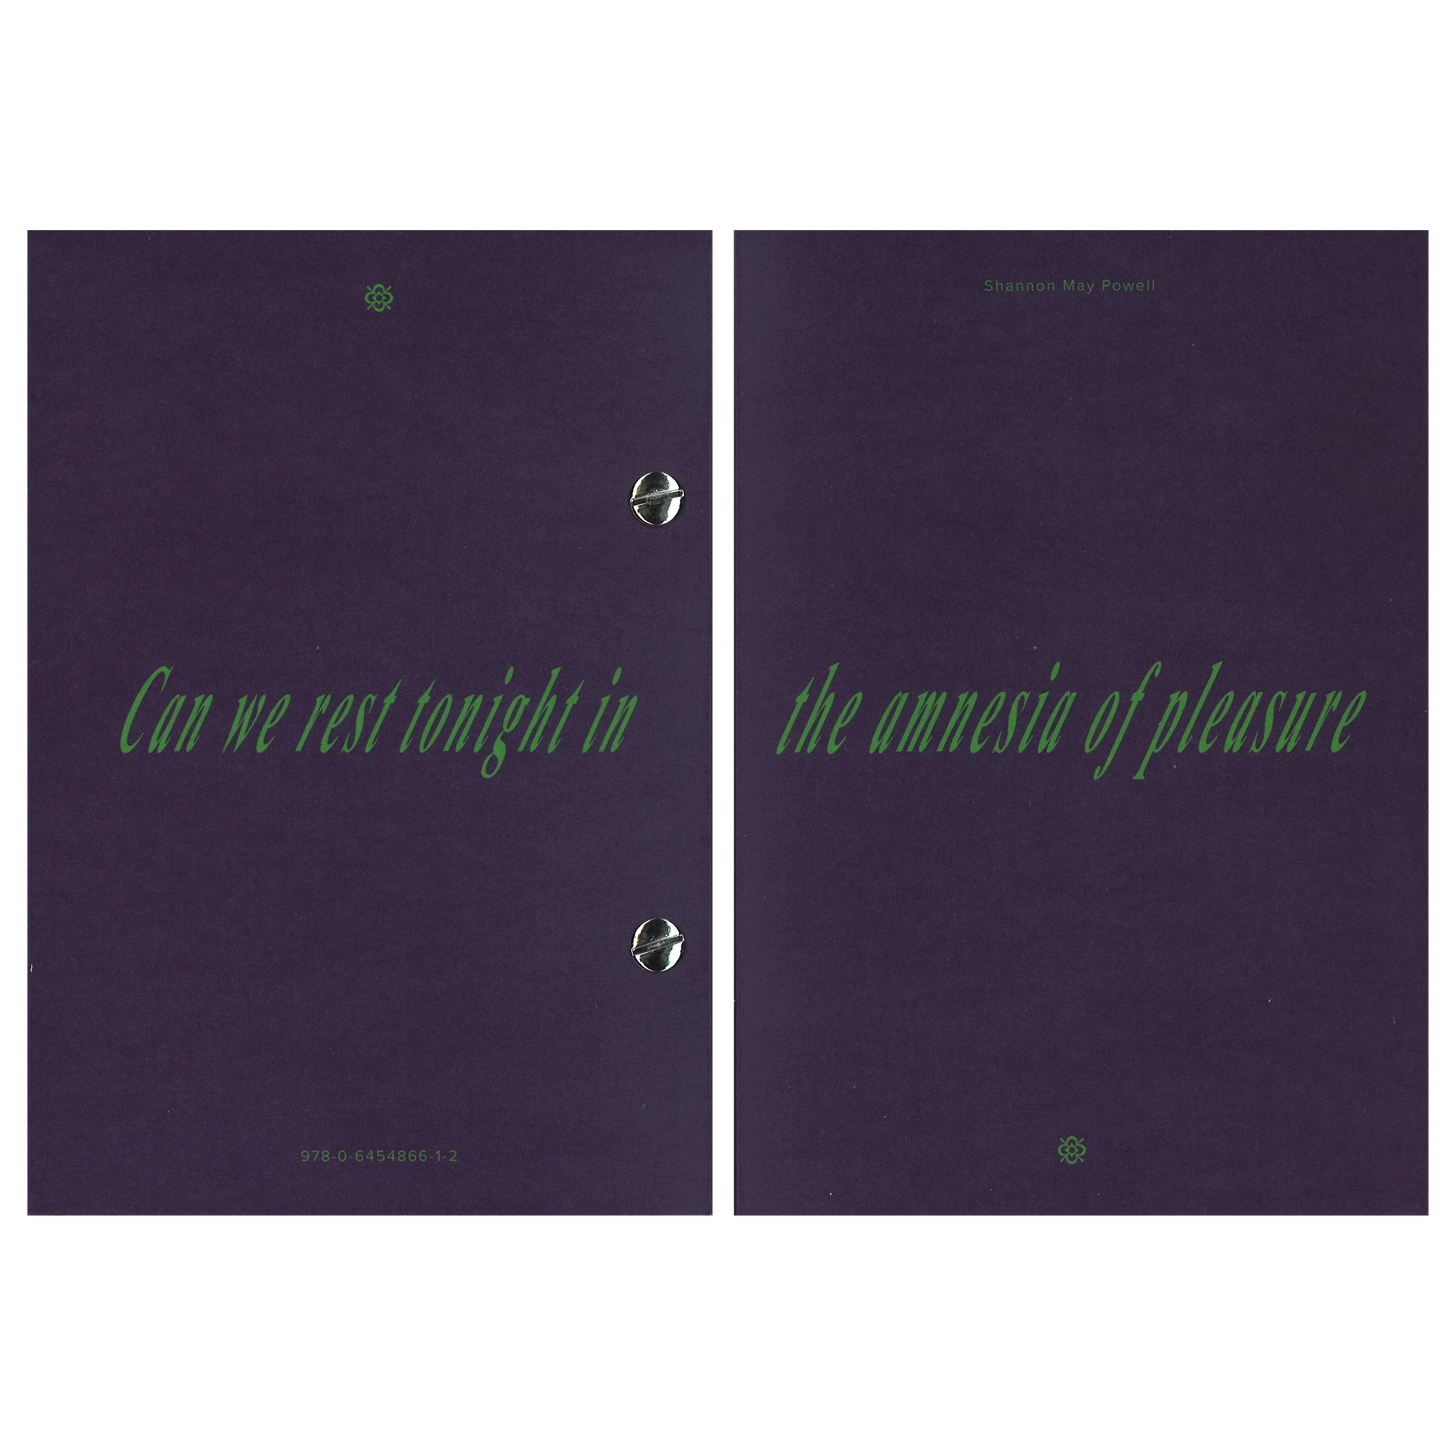 nmp.11 Can we rest tonight in // the amnesia of pleasure, 2022. English, folio bound (exposed spine, chicago screws), 112 pages, 123 x 178 mm. First edition, edition of 200, numbered. 